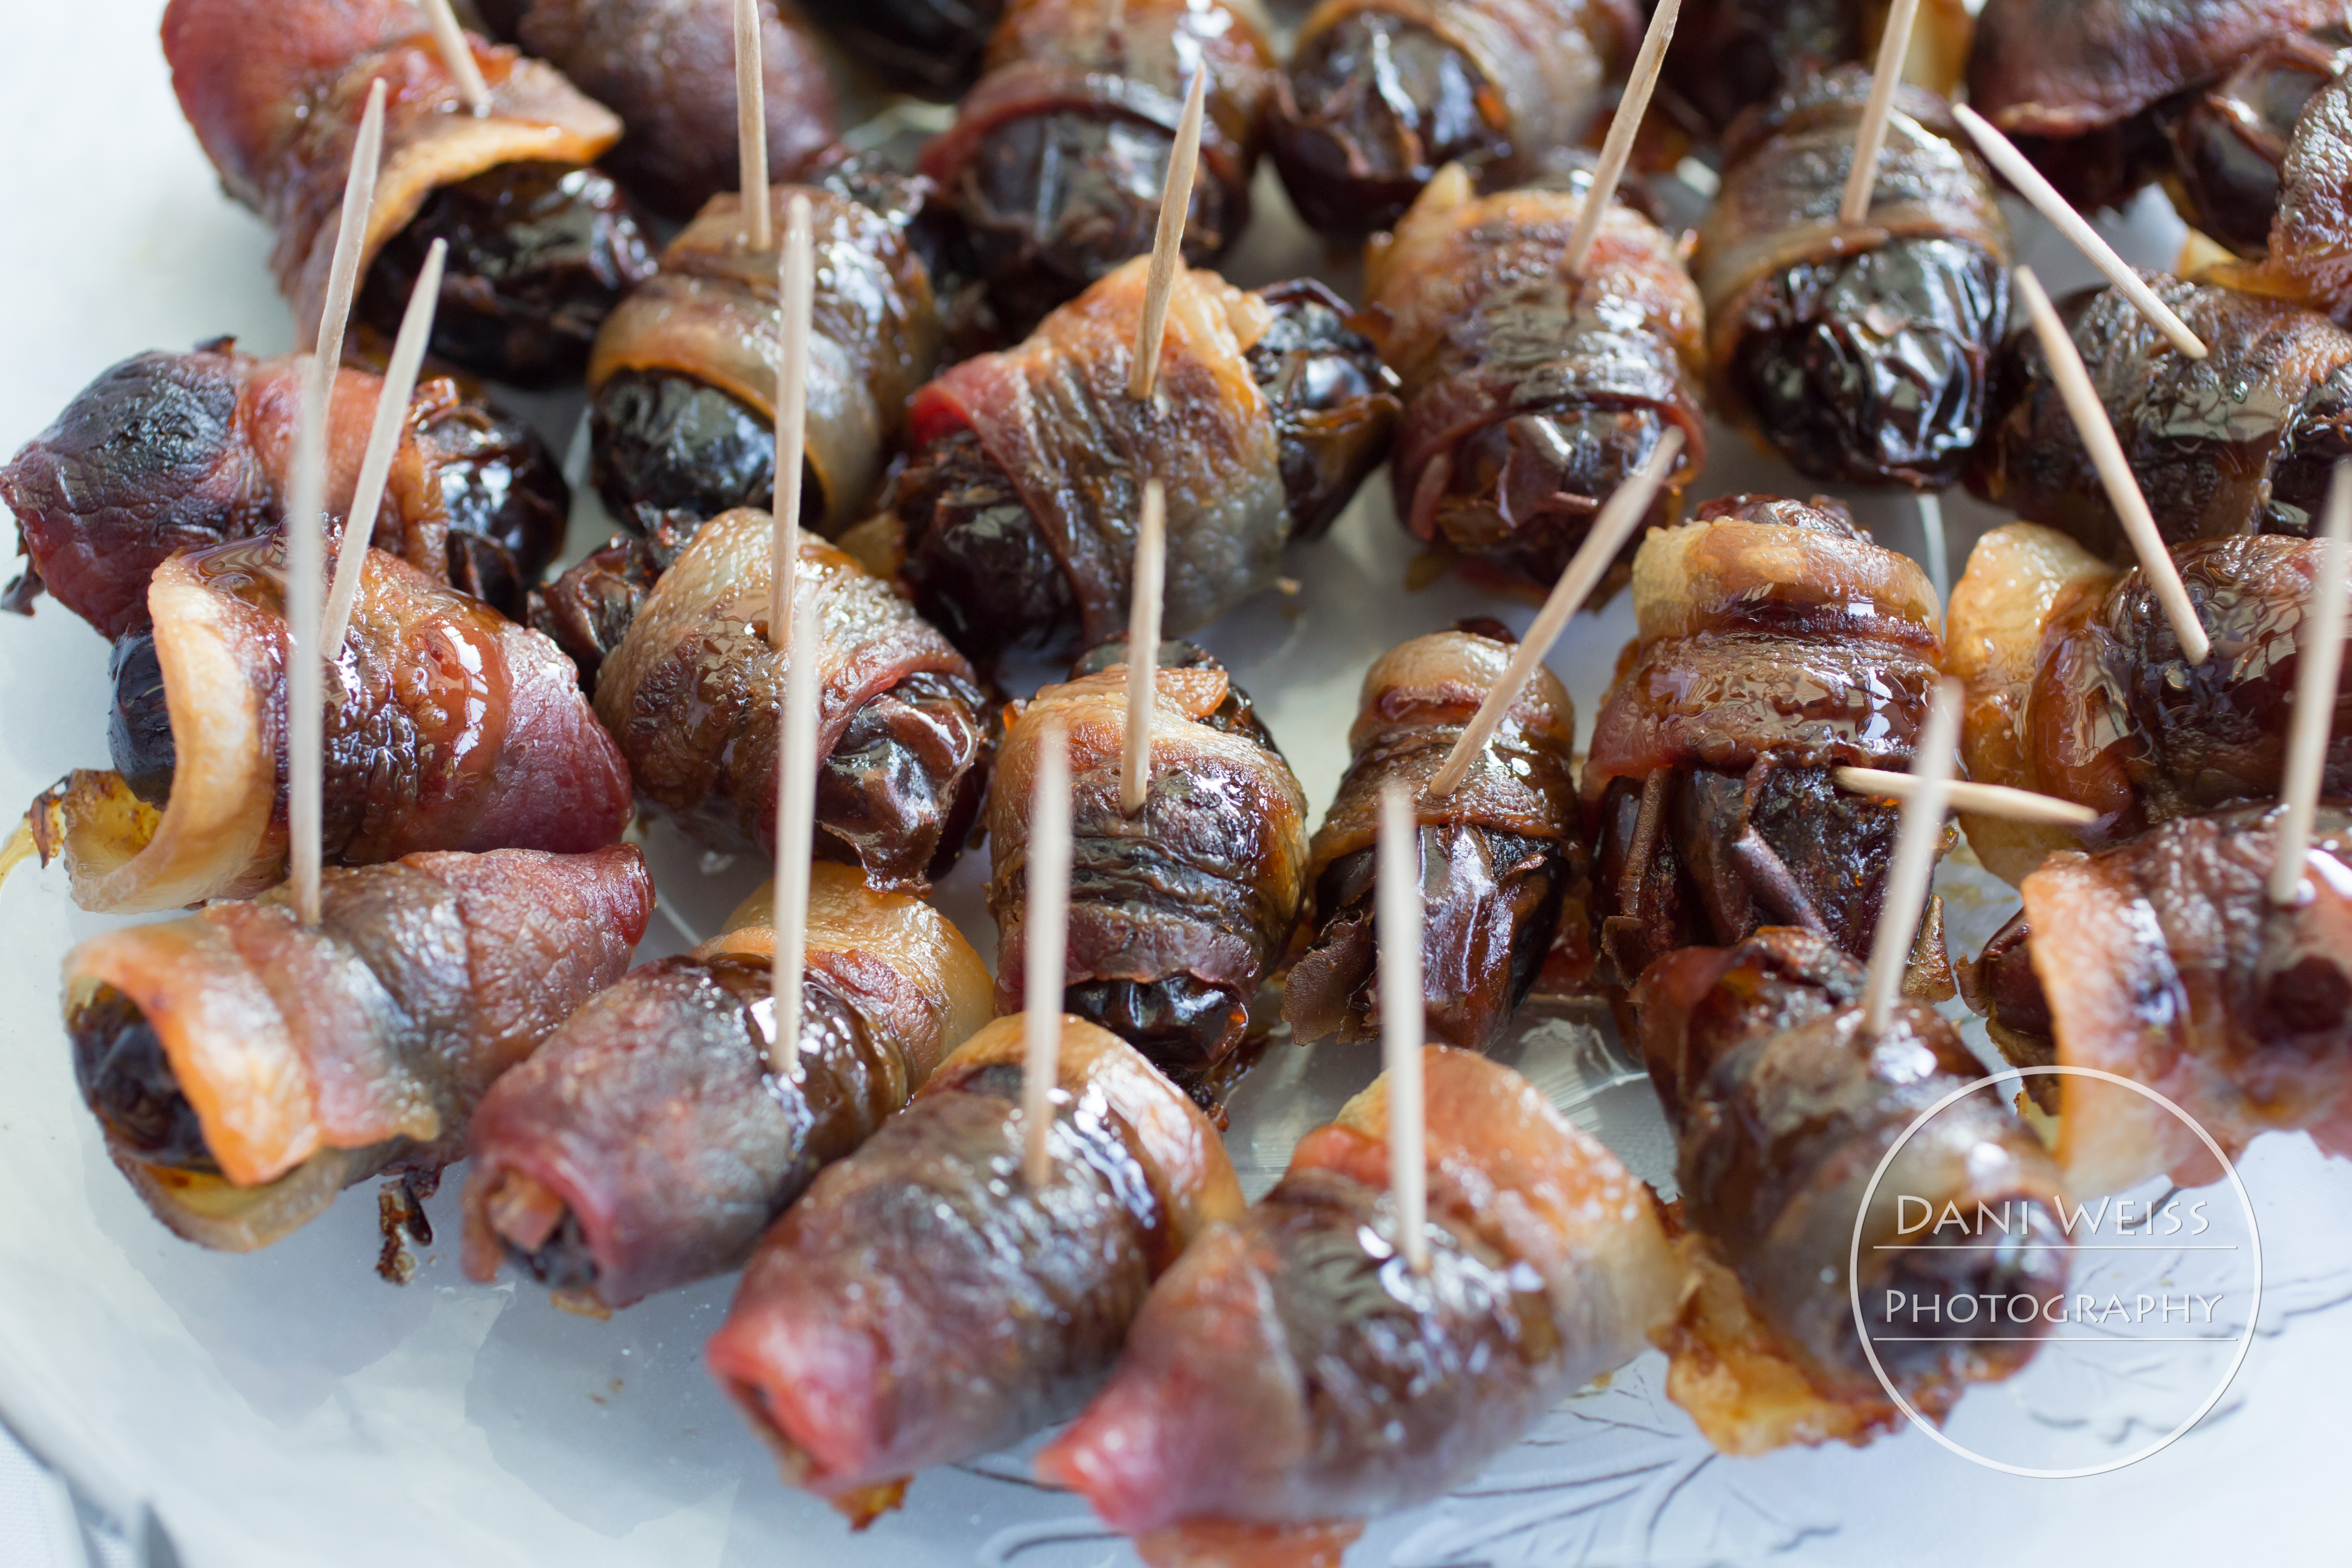 sweet sticky dates stuffed with marcona almonds, wrapped in bacon then baked and drizzled with pomegranate molasses